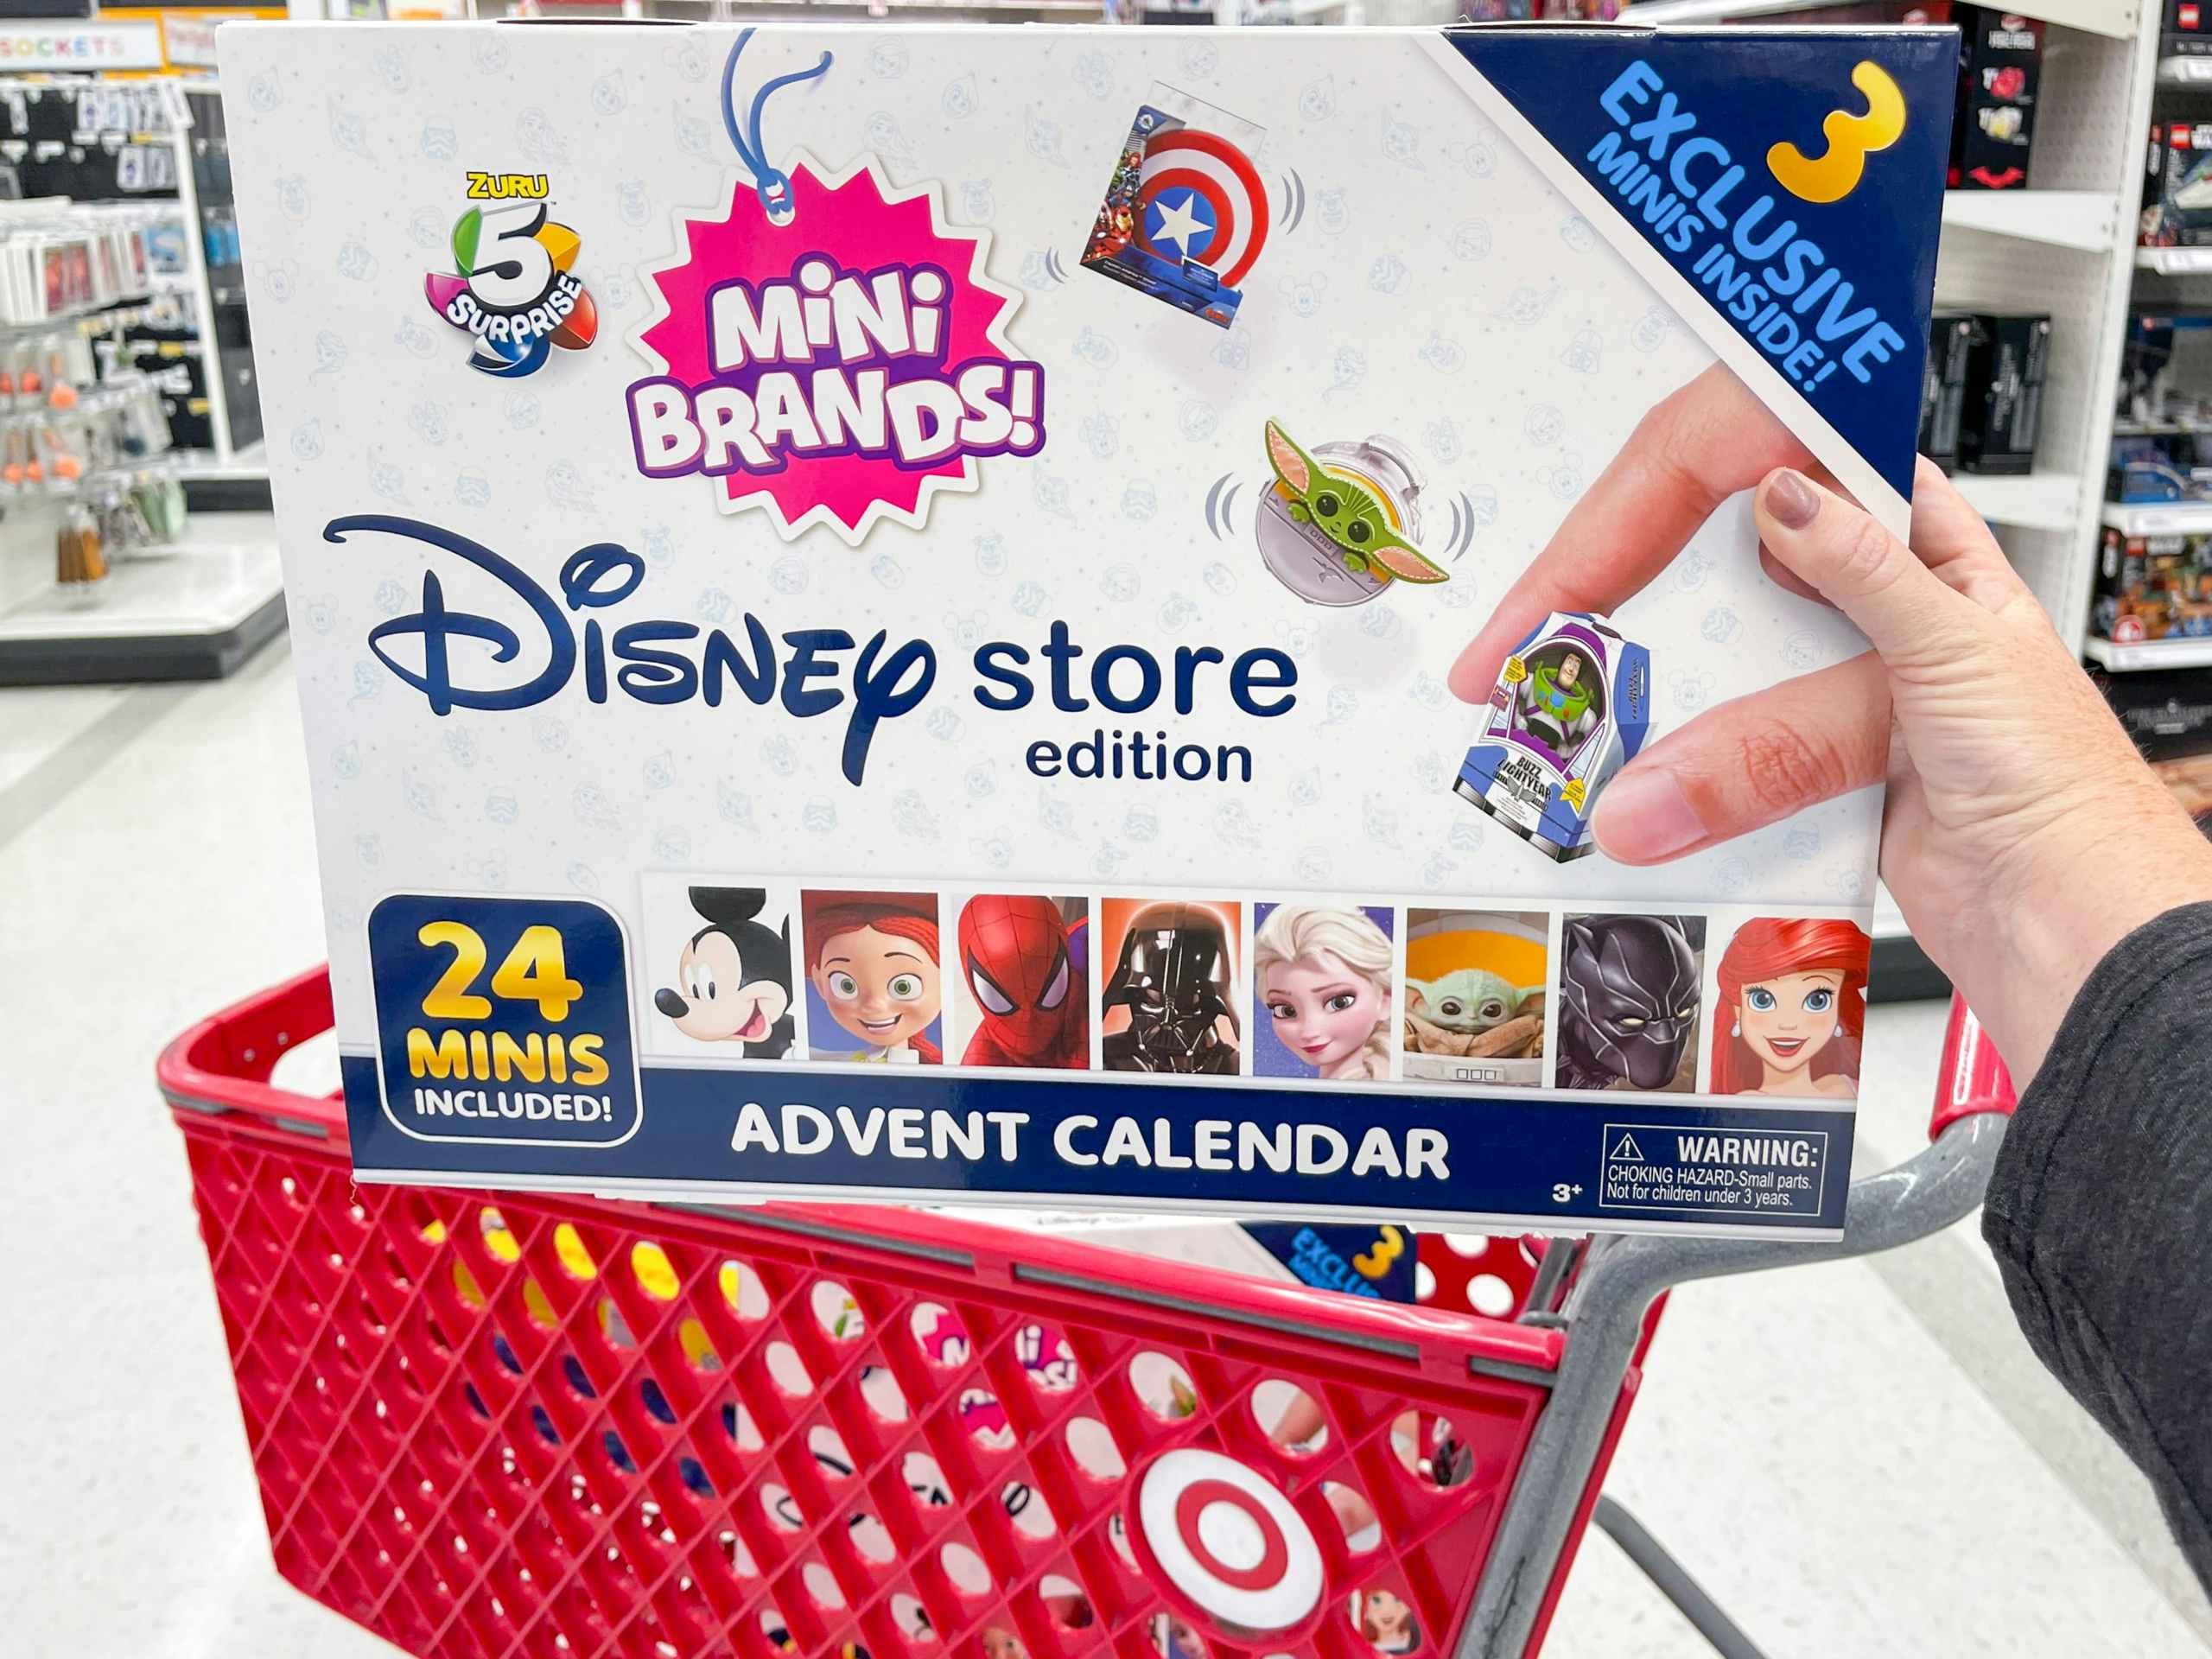 A person putting a Disney Store Mini Brands holiday advent calendar into a shopping cart at Target.